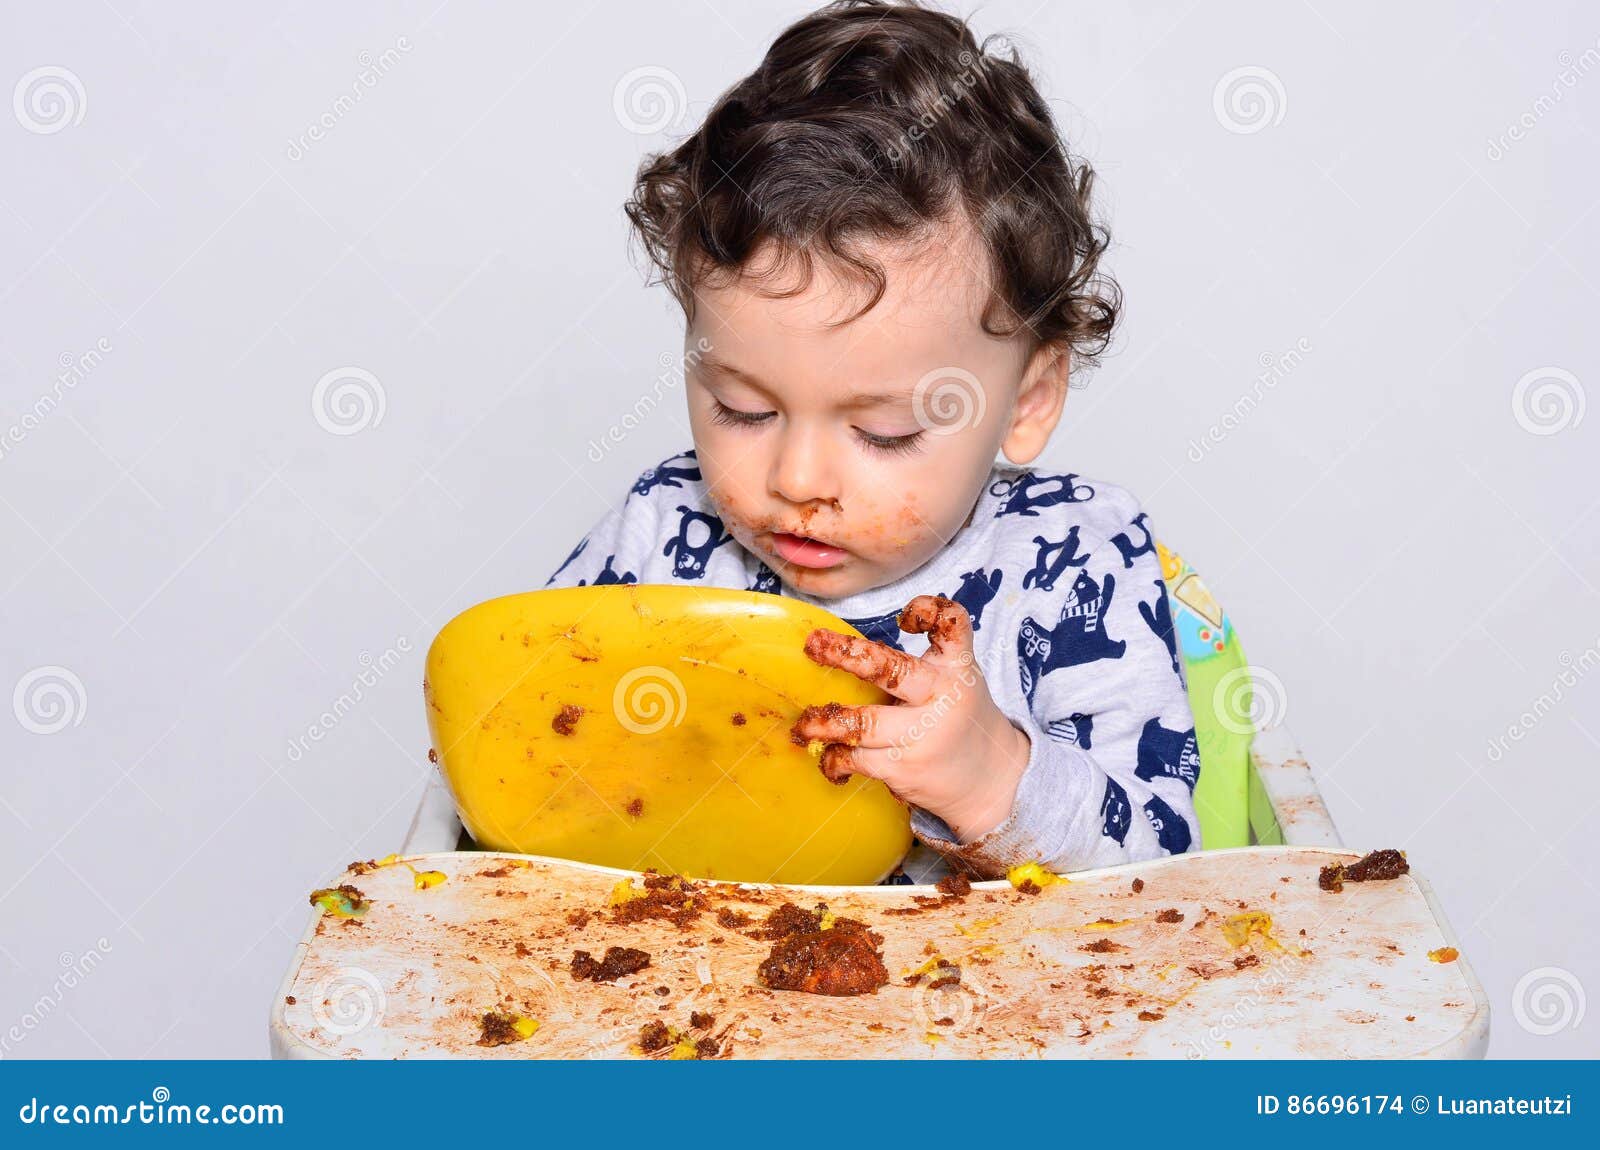 One Year Old Kid Eating a Slice of Birthday Smash Cake by Himself ...